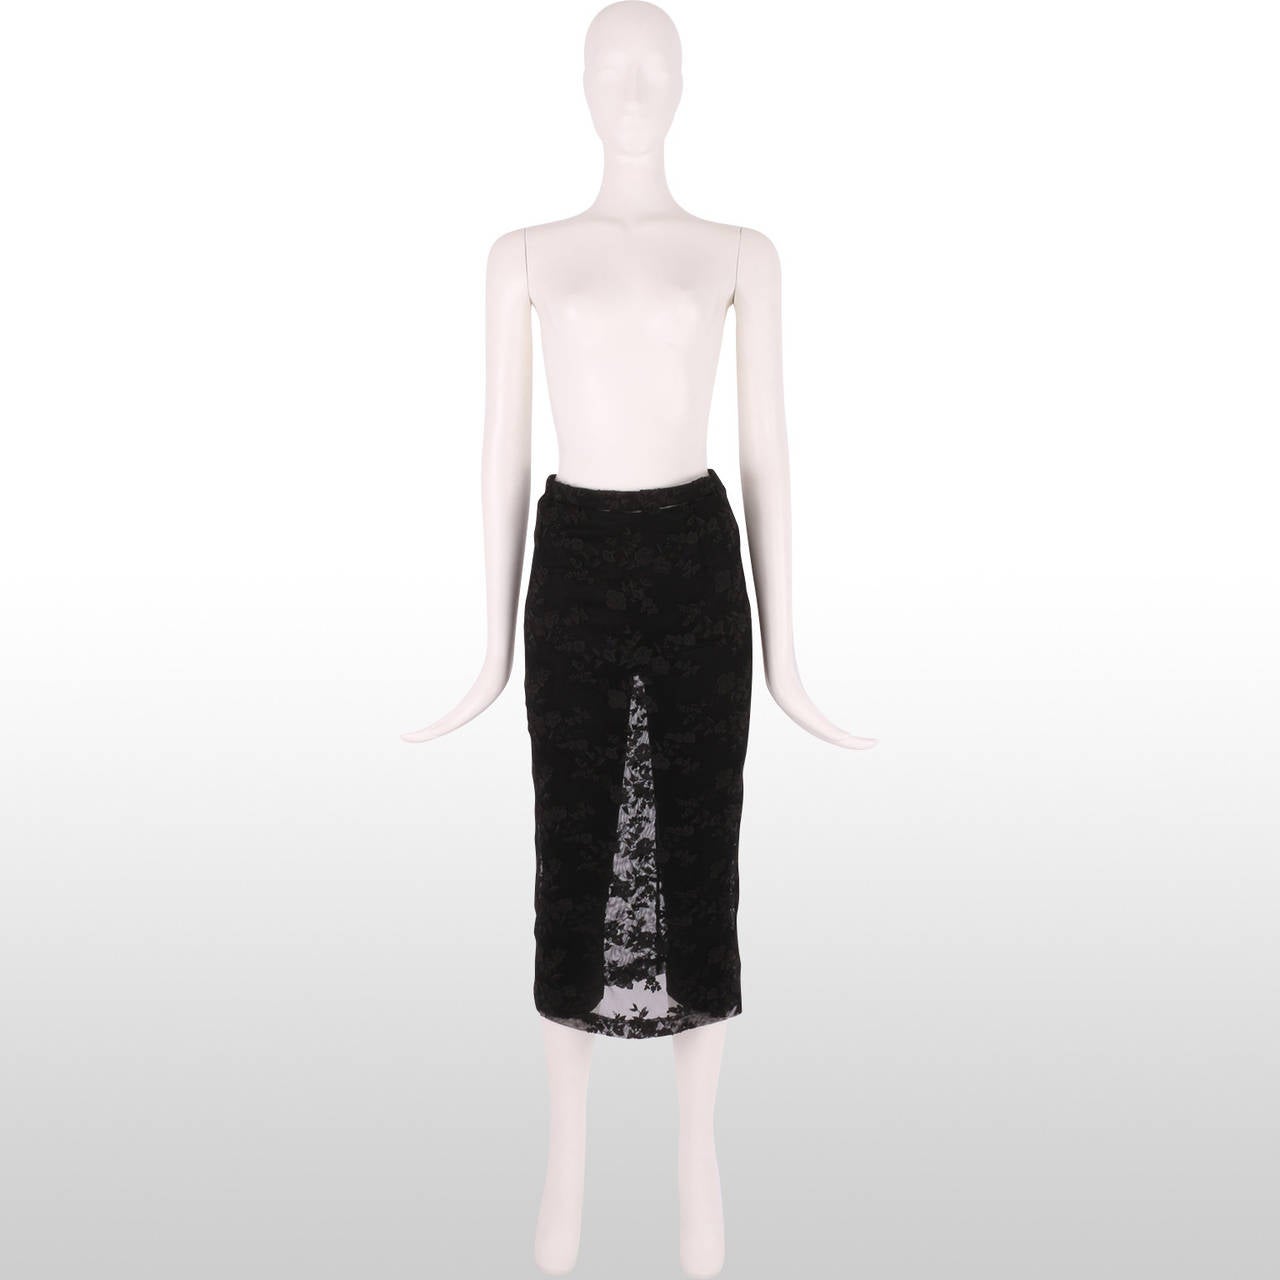 Dolce & Gabbana Black Pedal Pusher Leggings with Lace Skirt Overlay For Sale 3